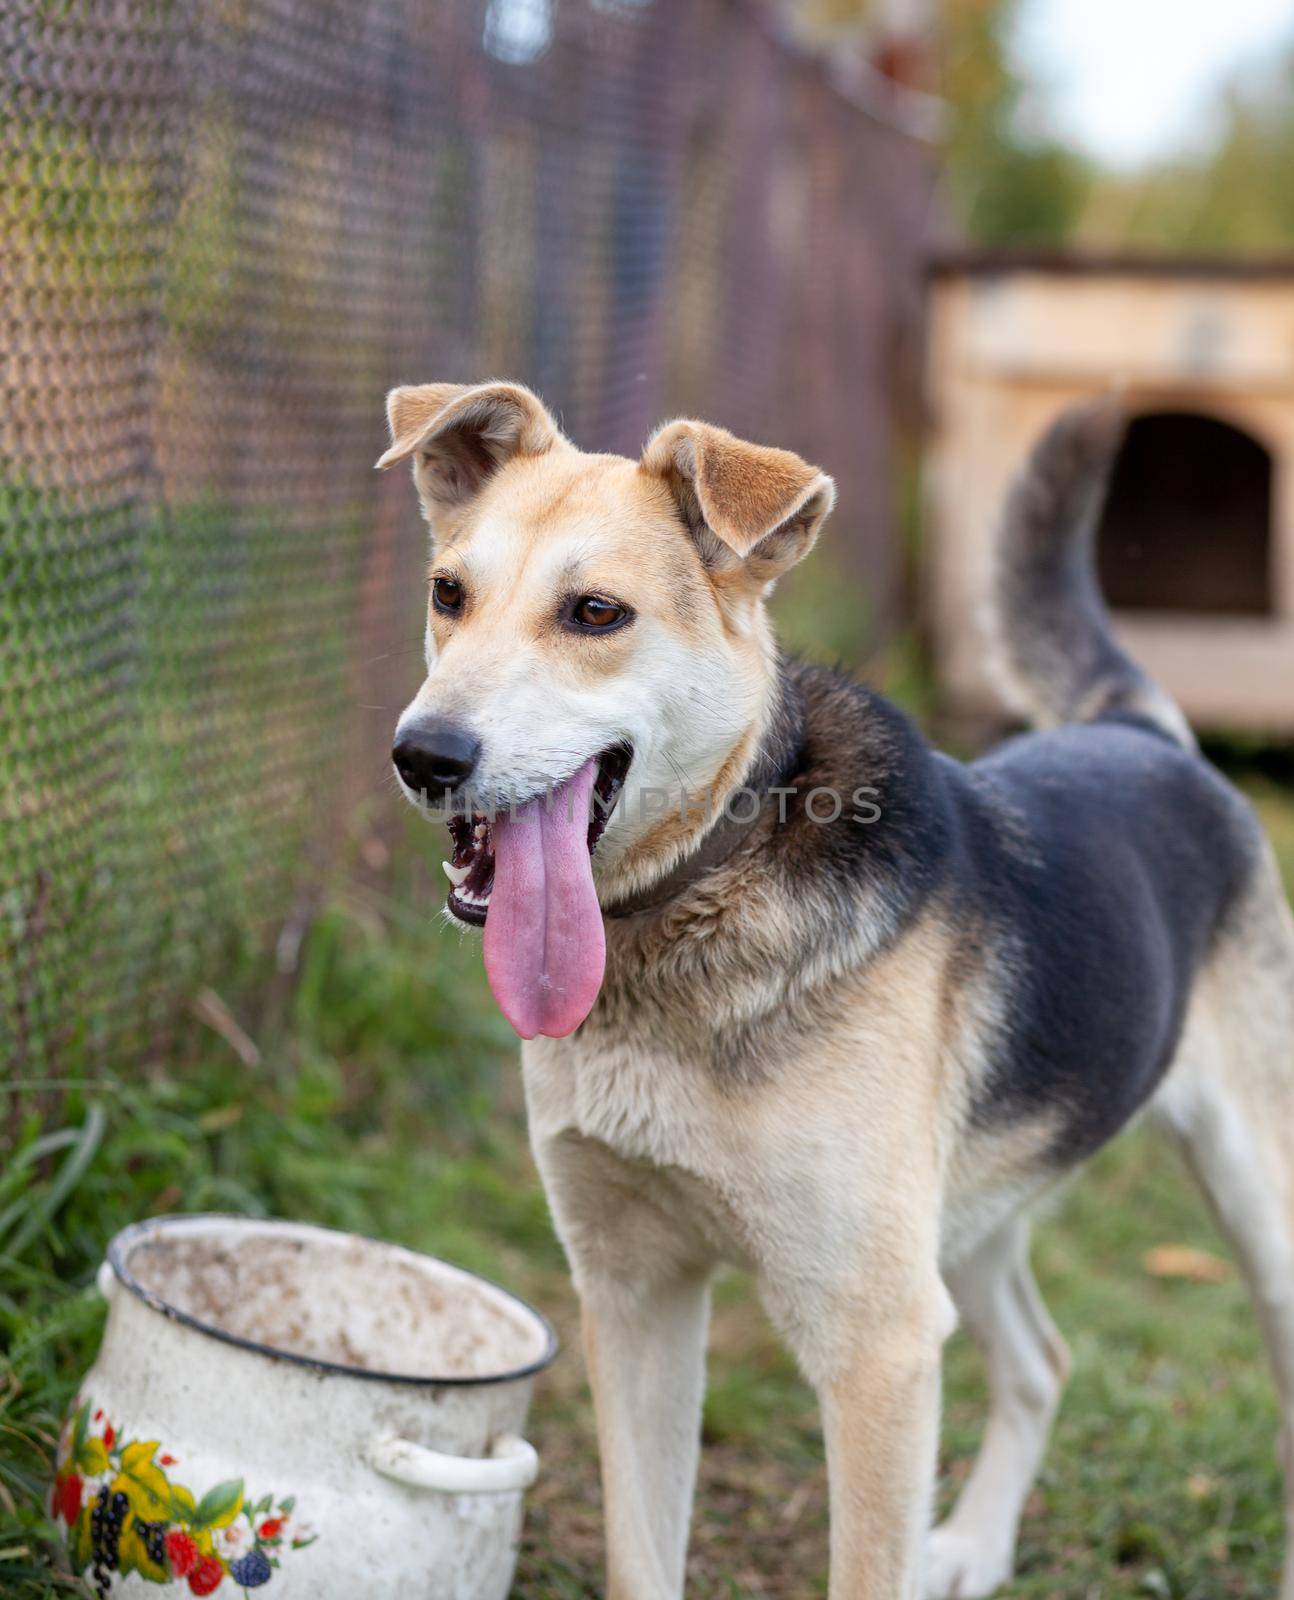 A cheerful big dog with a chain tongue sticking out. Portrait of a dog on a chain that guards the house close-up. A happy pet with its mouth open. Simple dog house in the background